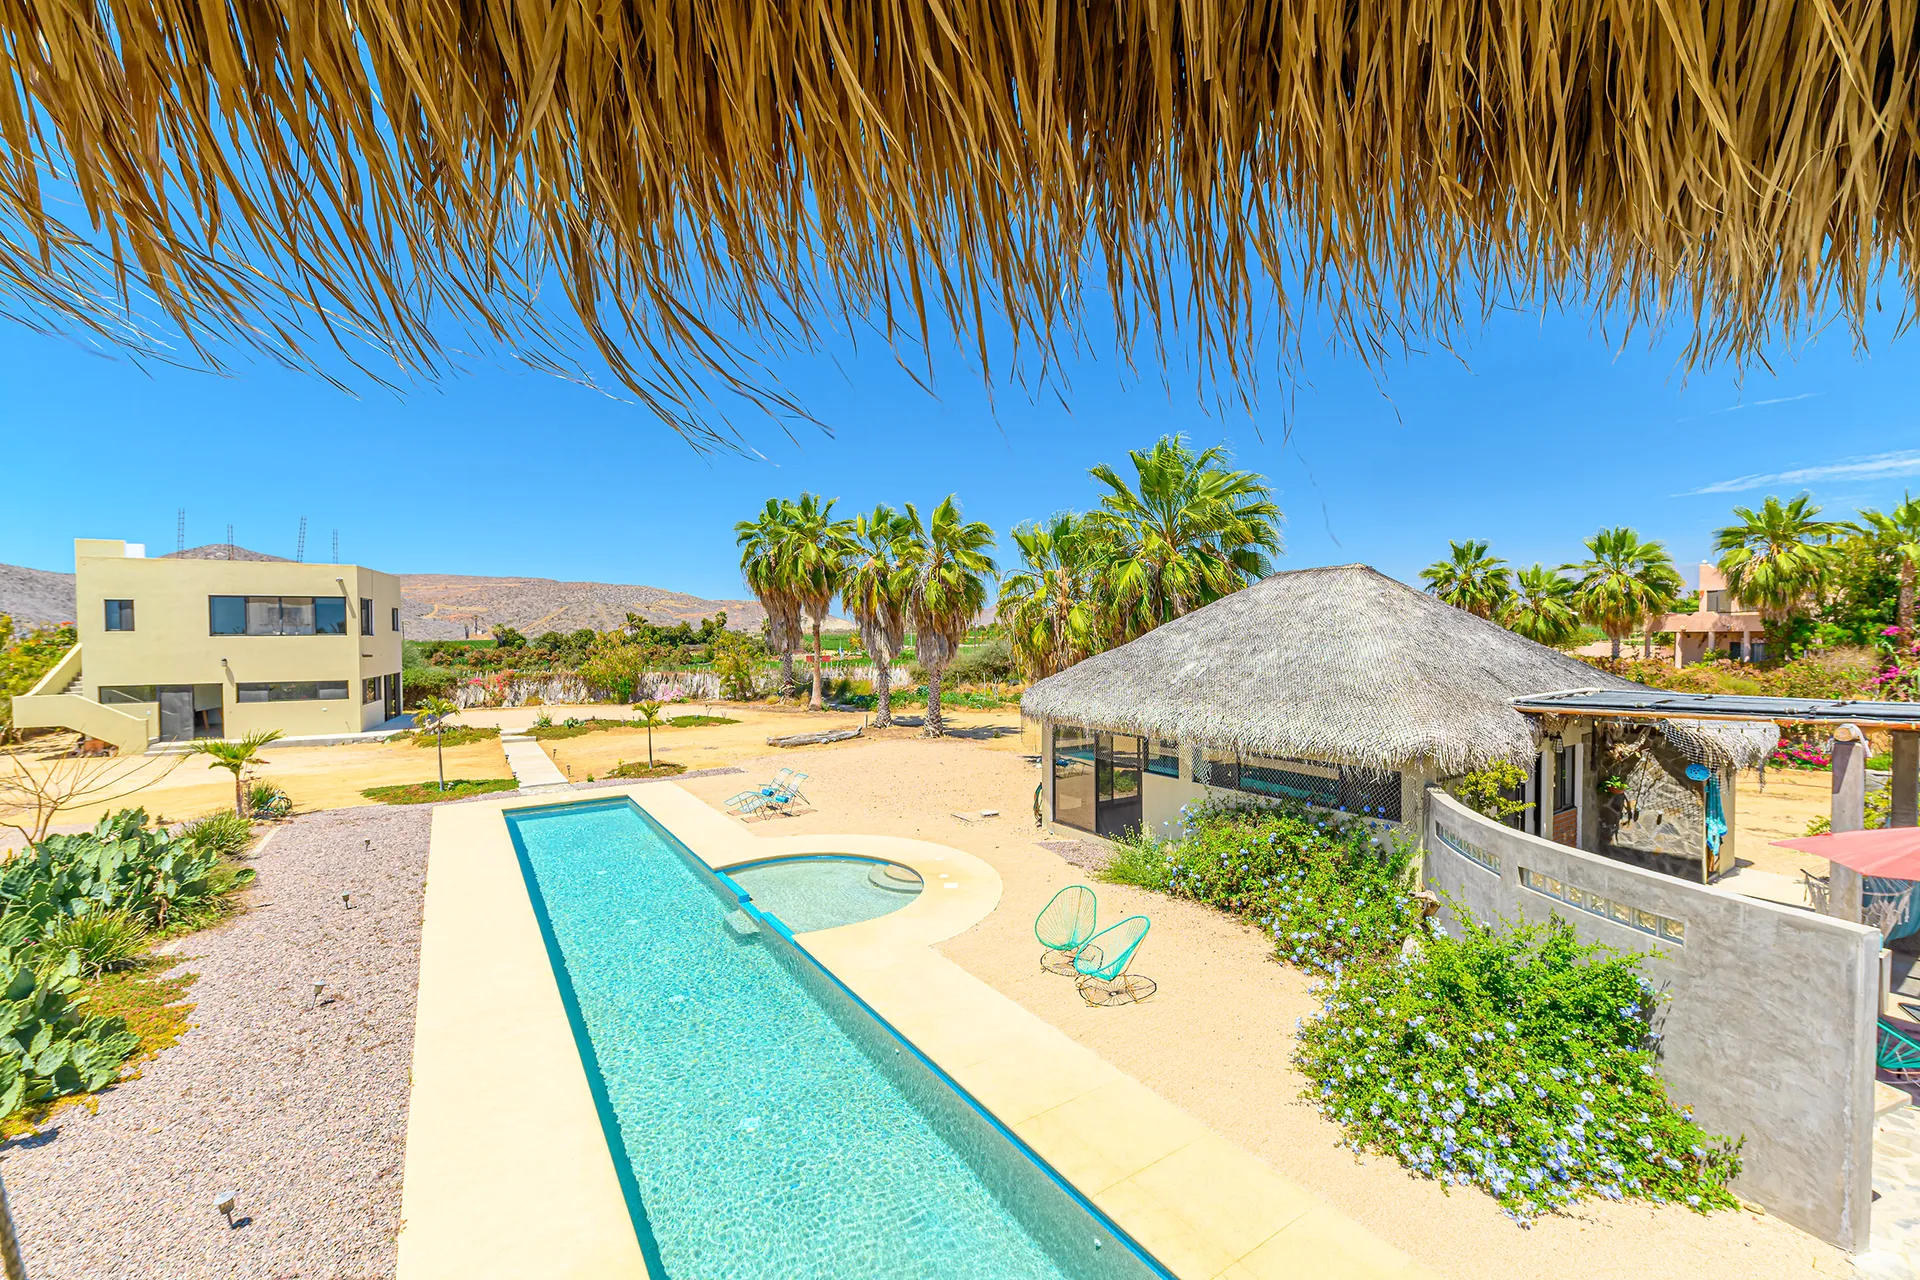 One acre divided into two lots, two one-bedroom casitas, a one-bedroom, one-bath house, yoga or art studio, sixty-foot heated lap pool, community kitchen with full bath and barbecue area.